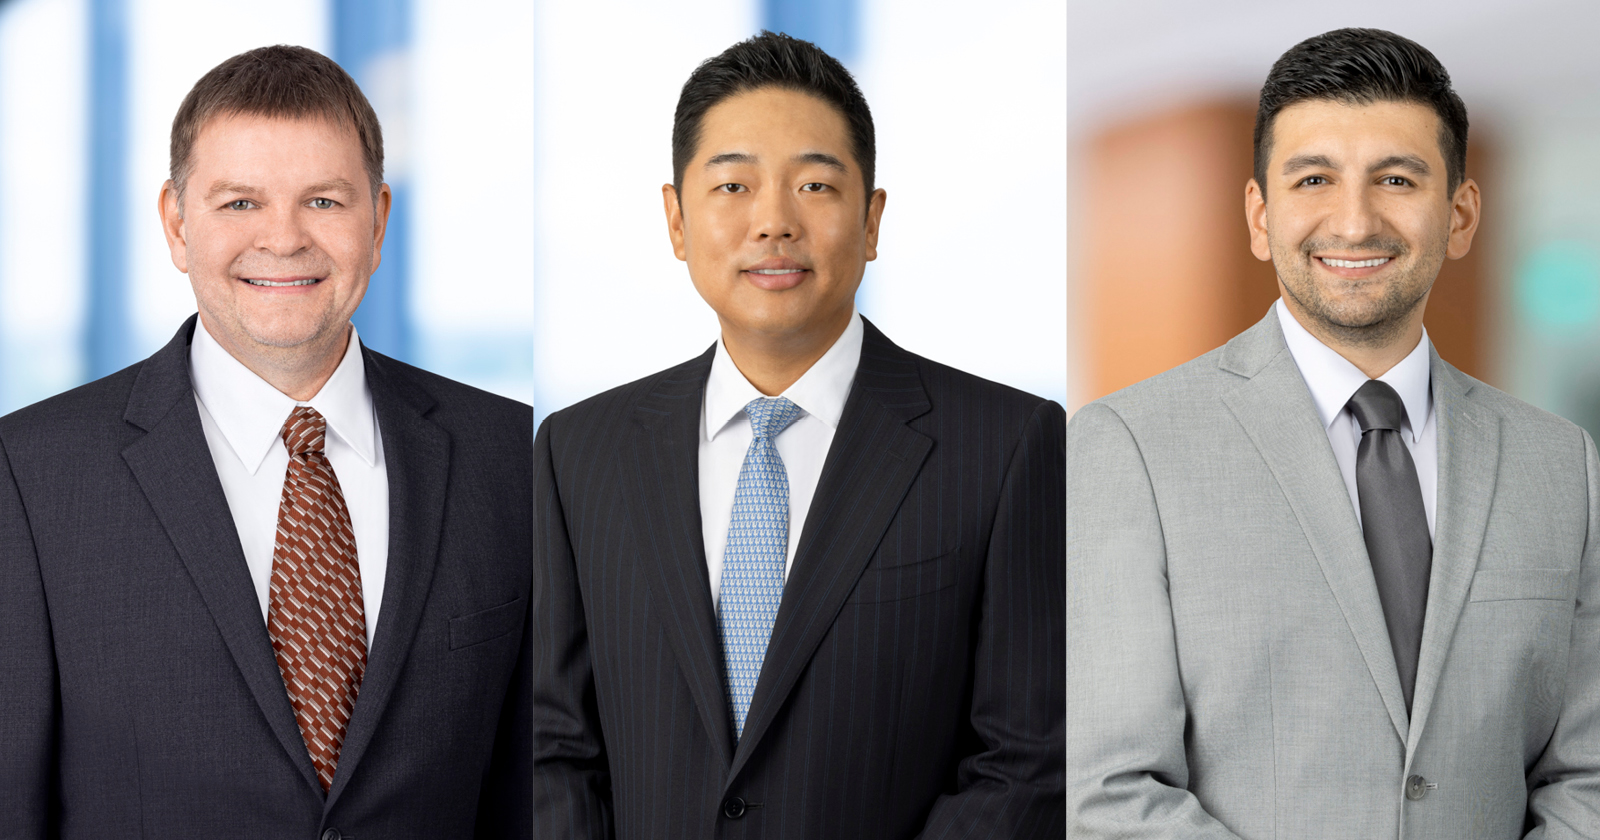 Media item displaying McGlinchey Expands Irvine Team with Three New Attorneys